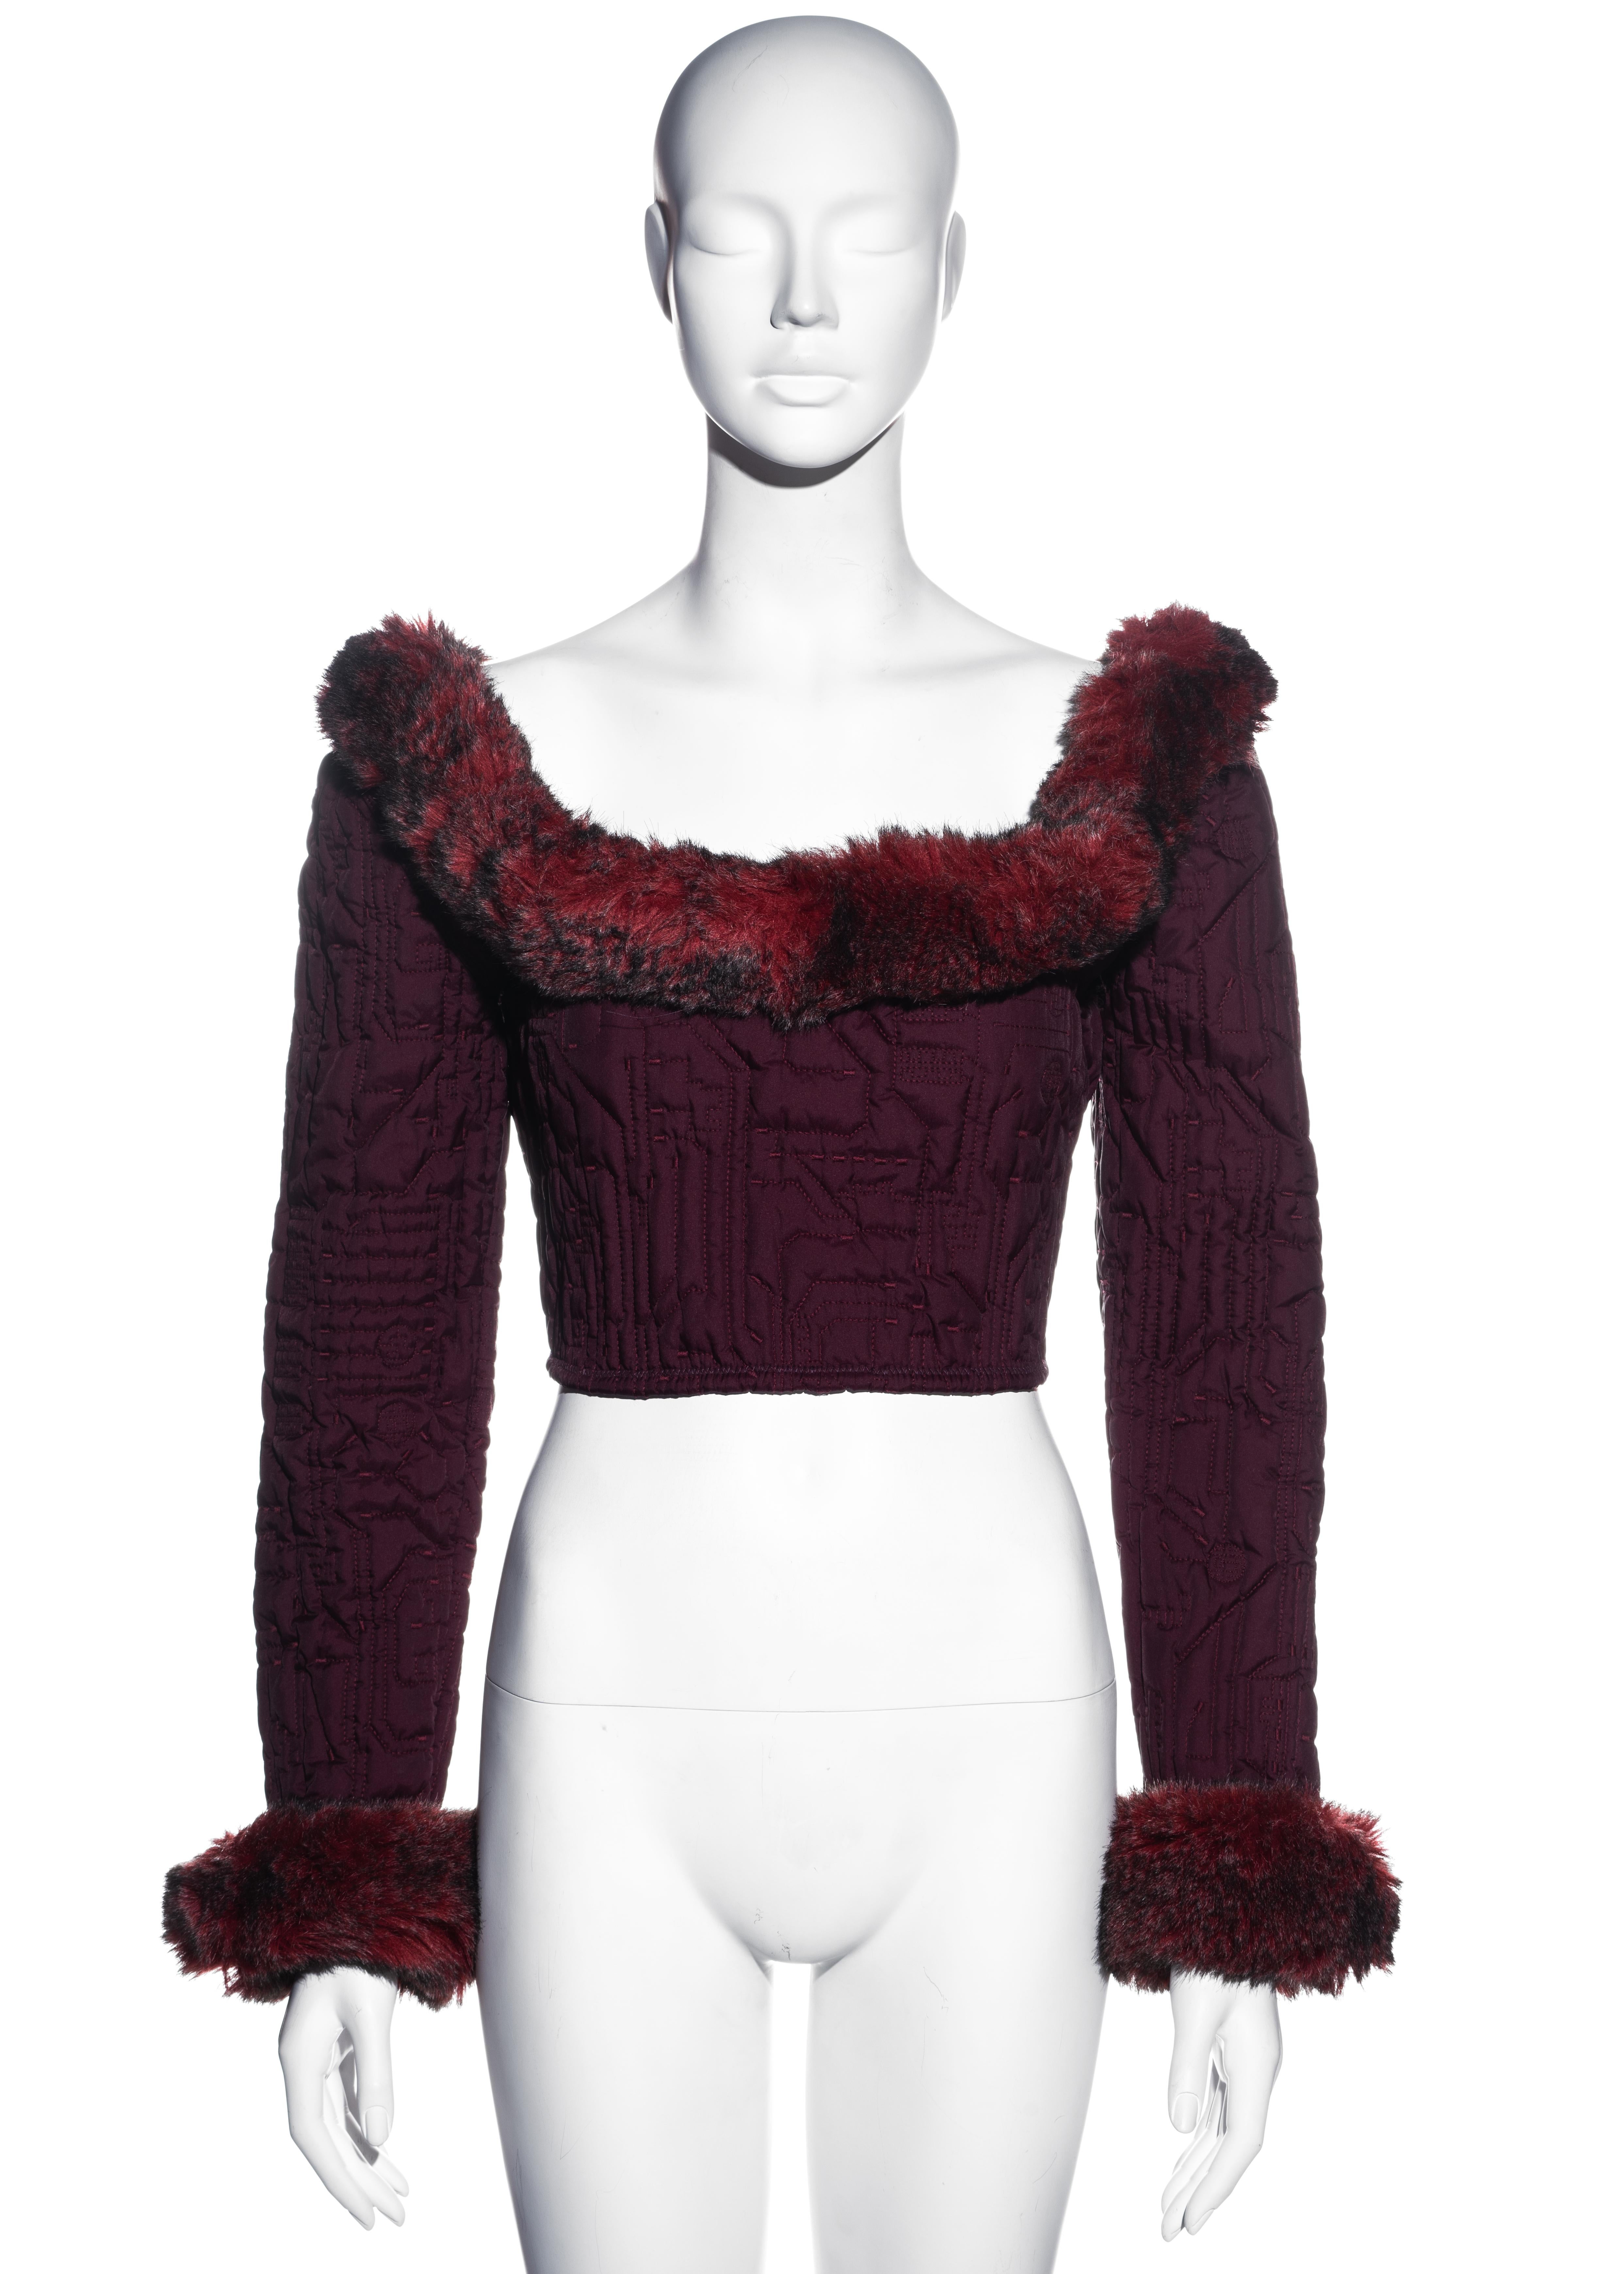 ▪ Jean Paul Gaultier plum corset top
▪ 100% Polyester 
▪ Embroidered circuitboard design 
▪ Faux fur trim around collar and cuffs 
▪ Back zip fastening  
▪ IT 44 - FR 40 - UK 12 - US 10
▪ Fall-Winter 1995